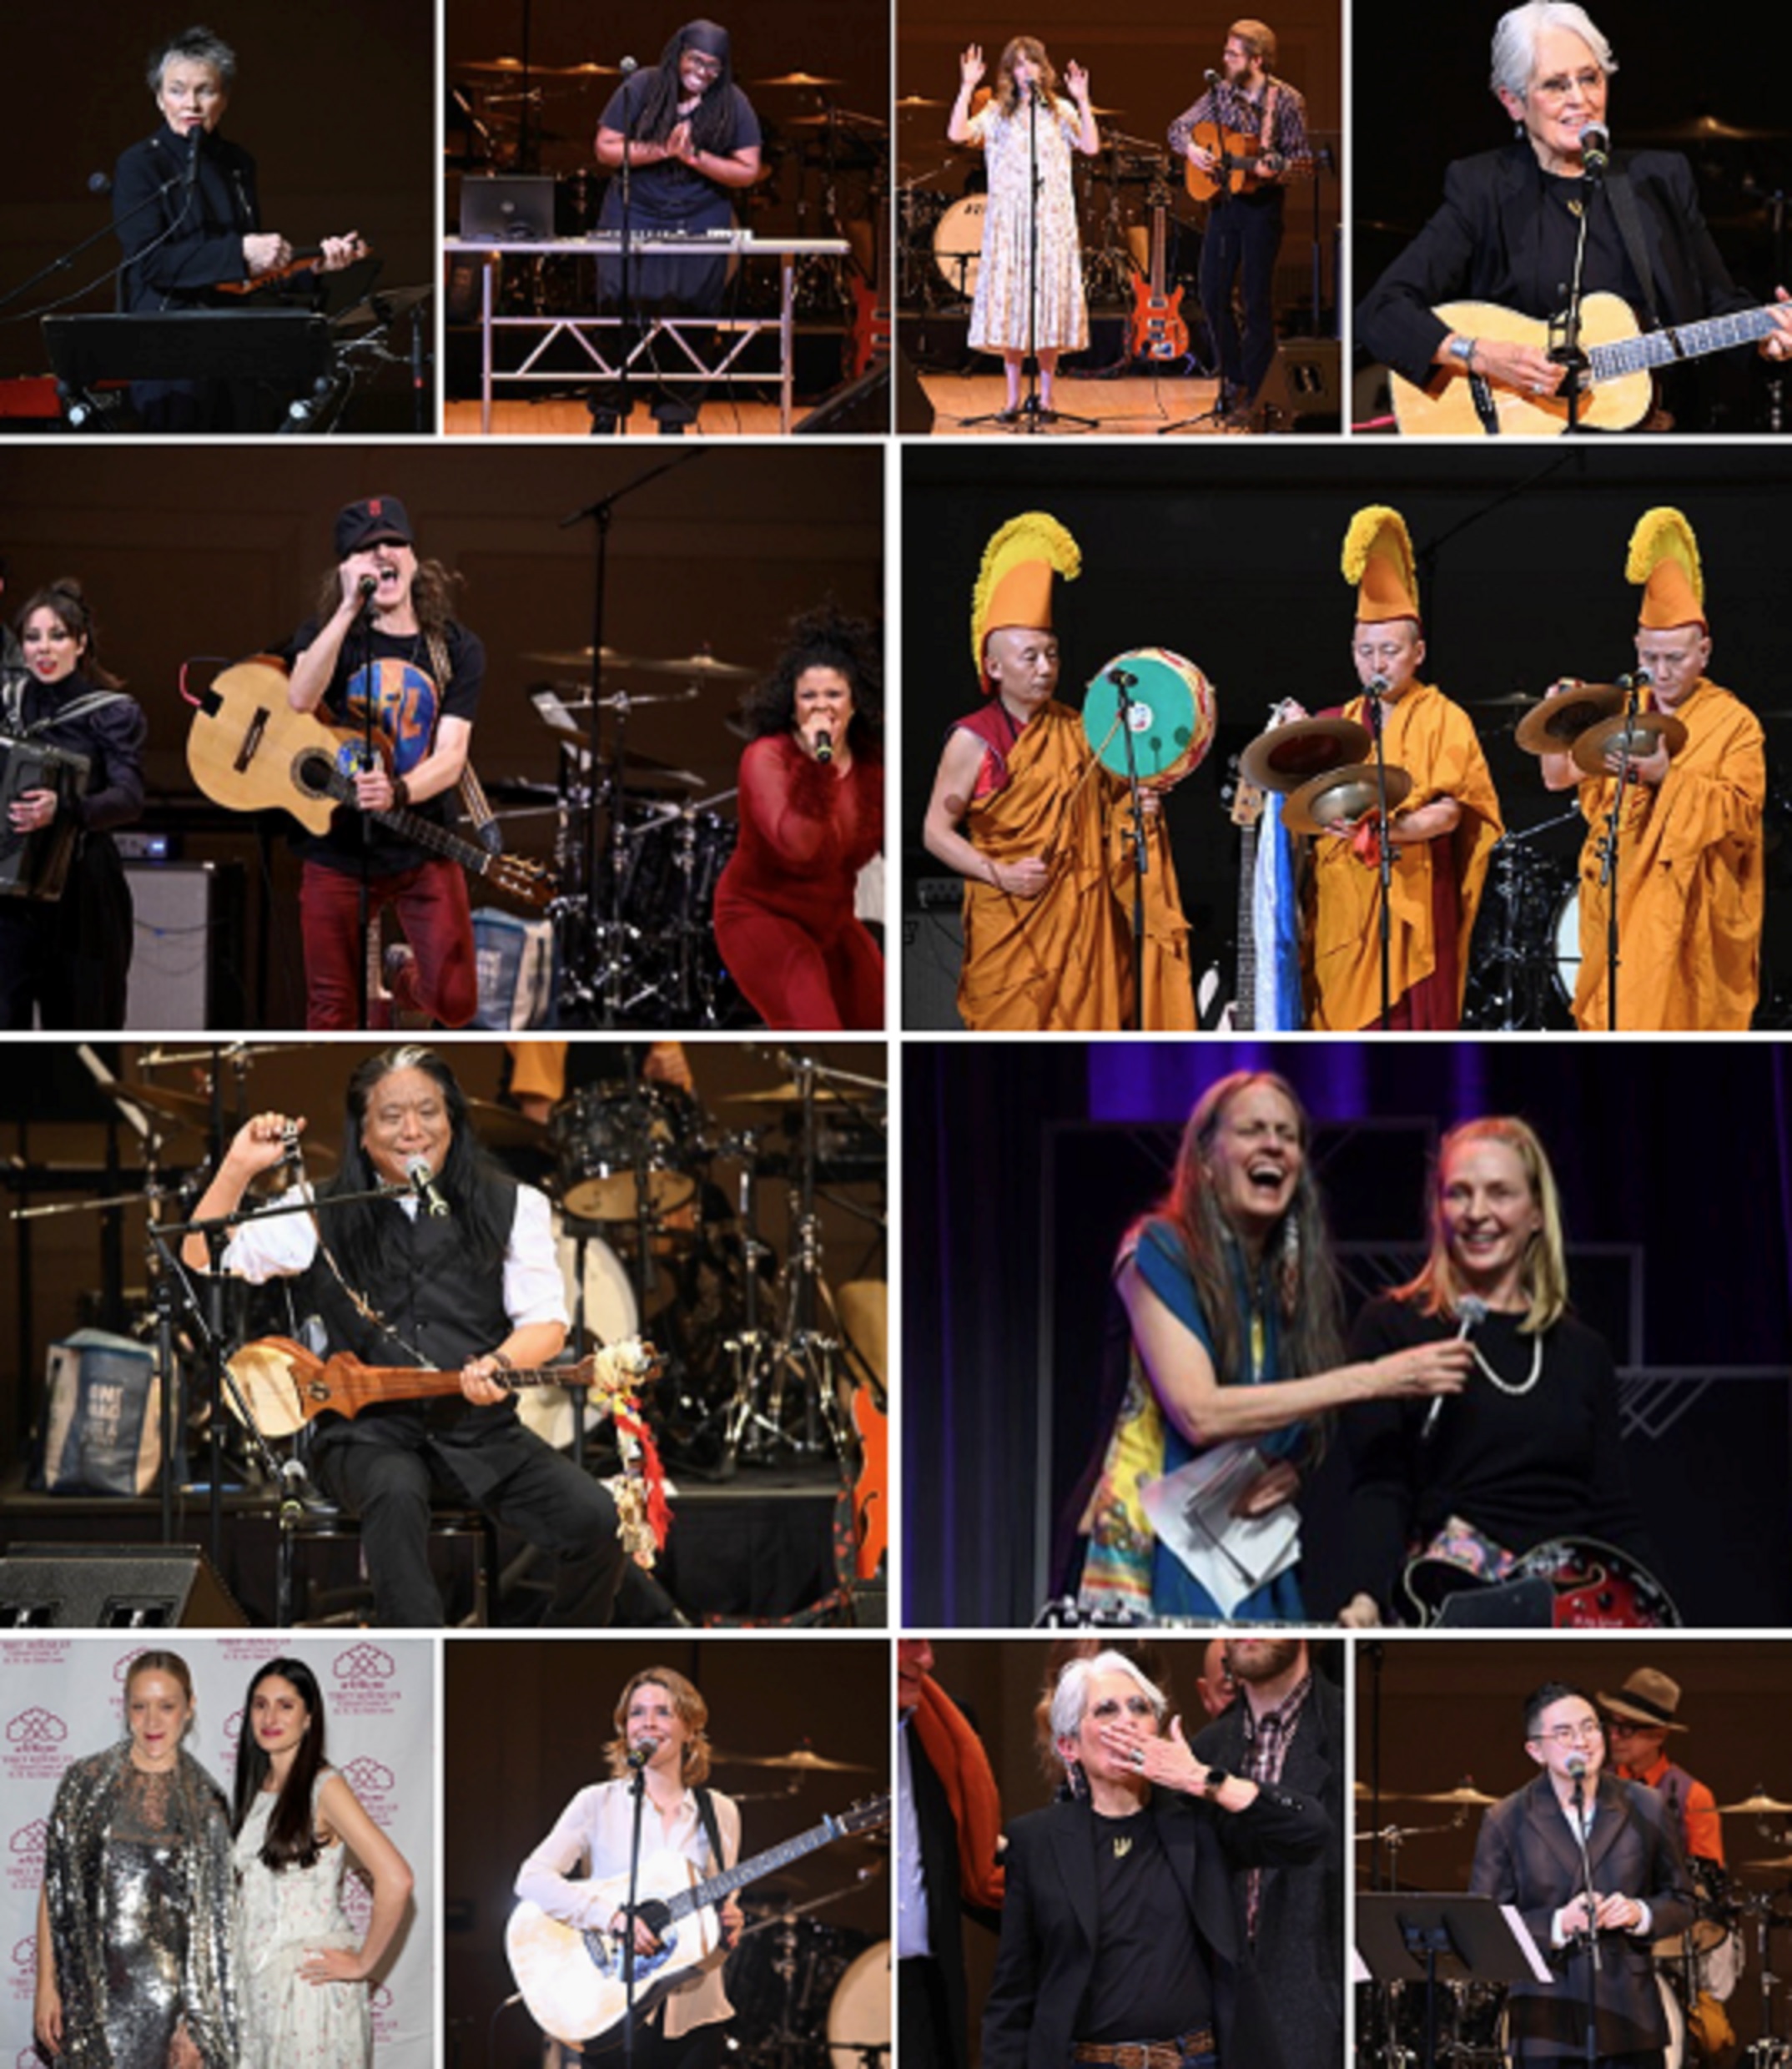 37th Annual Tibet House US Benefit Concert Brings Magical Night of Music to Carnegie Hall